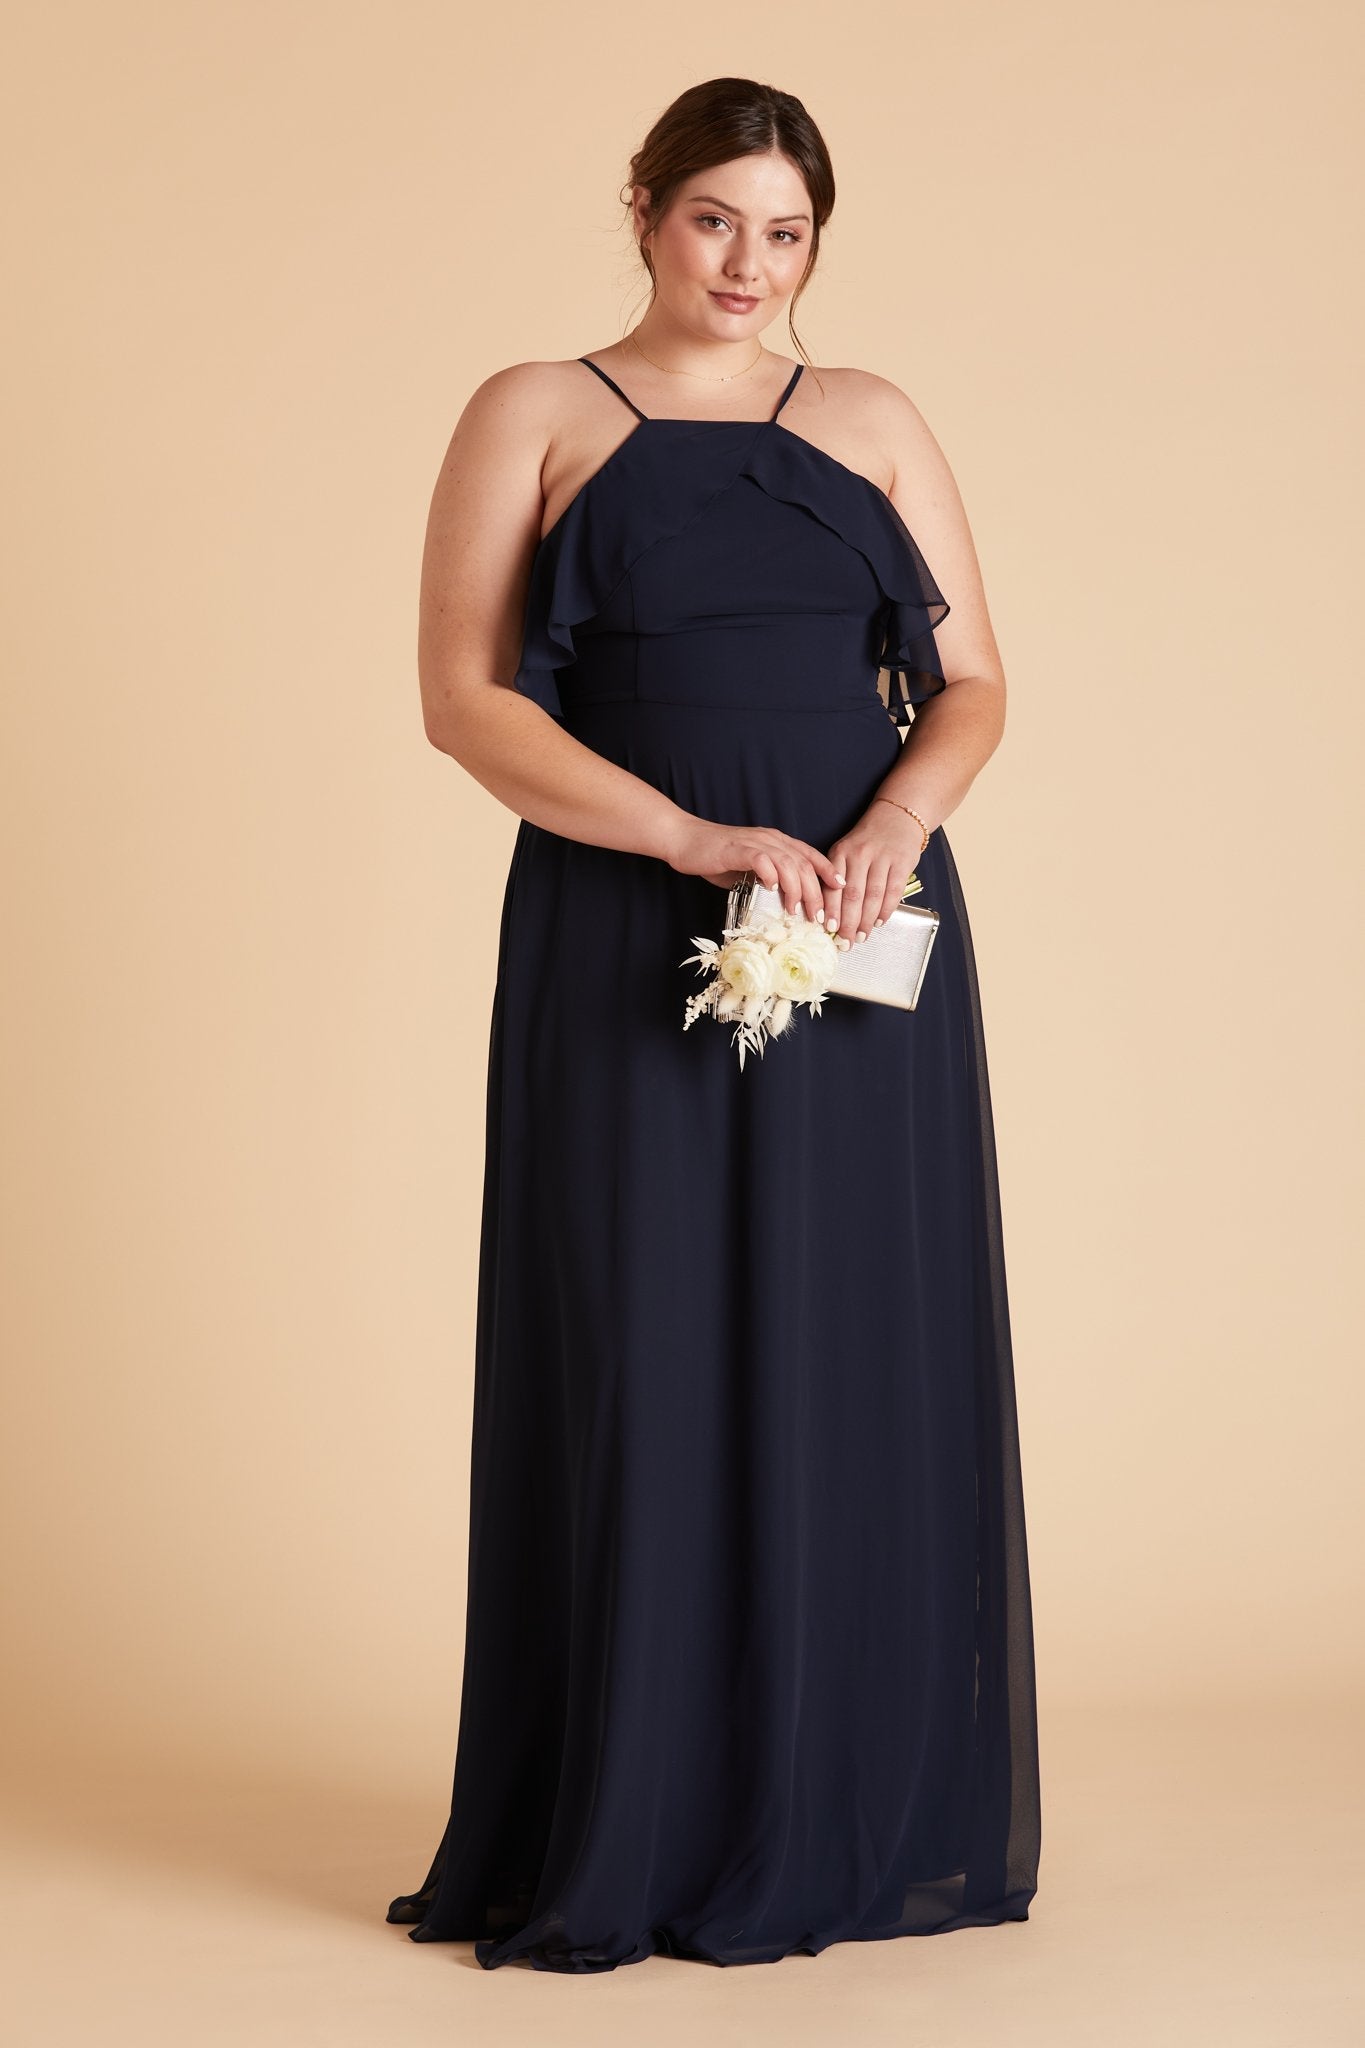 Jules plus size bridesmaid dress in navy blue chiffon by Birdy Grey, front view